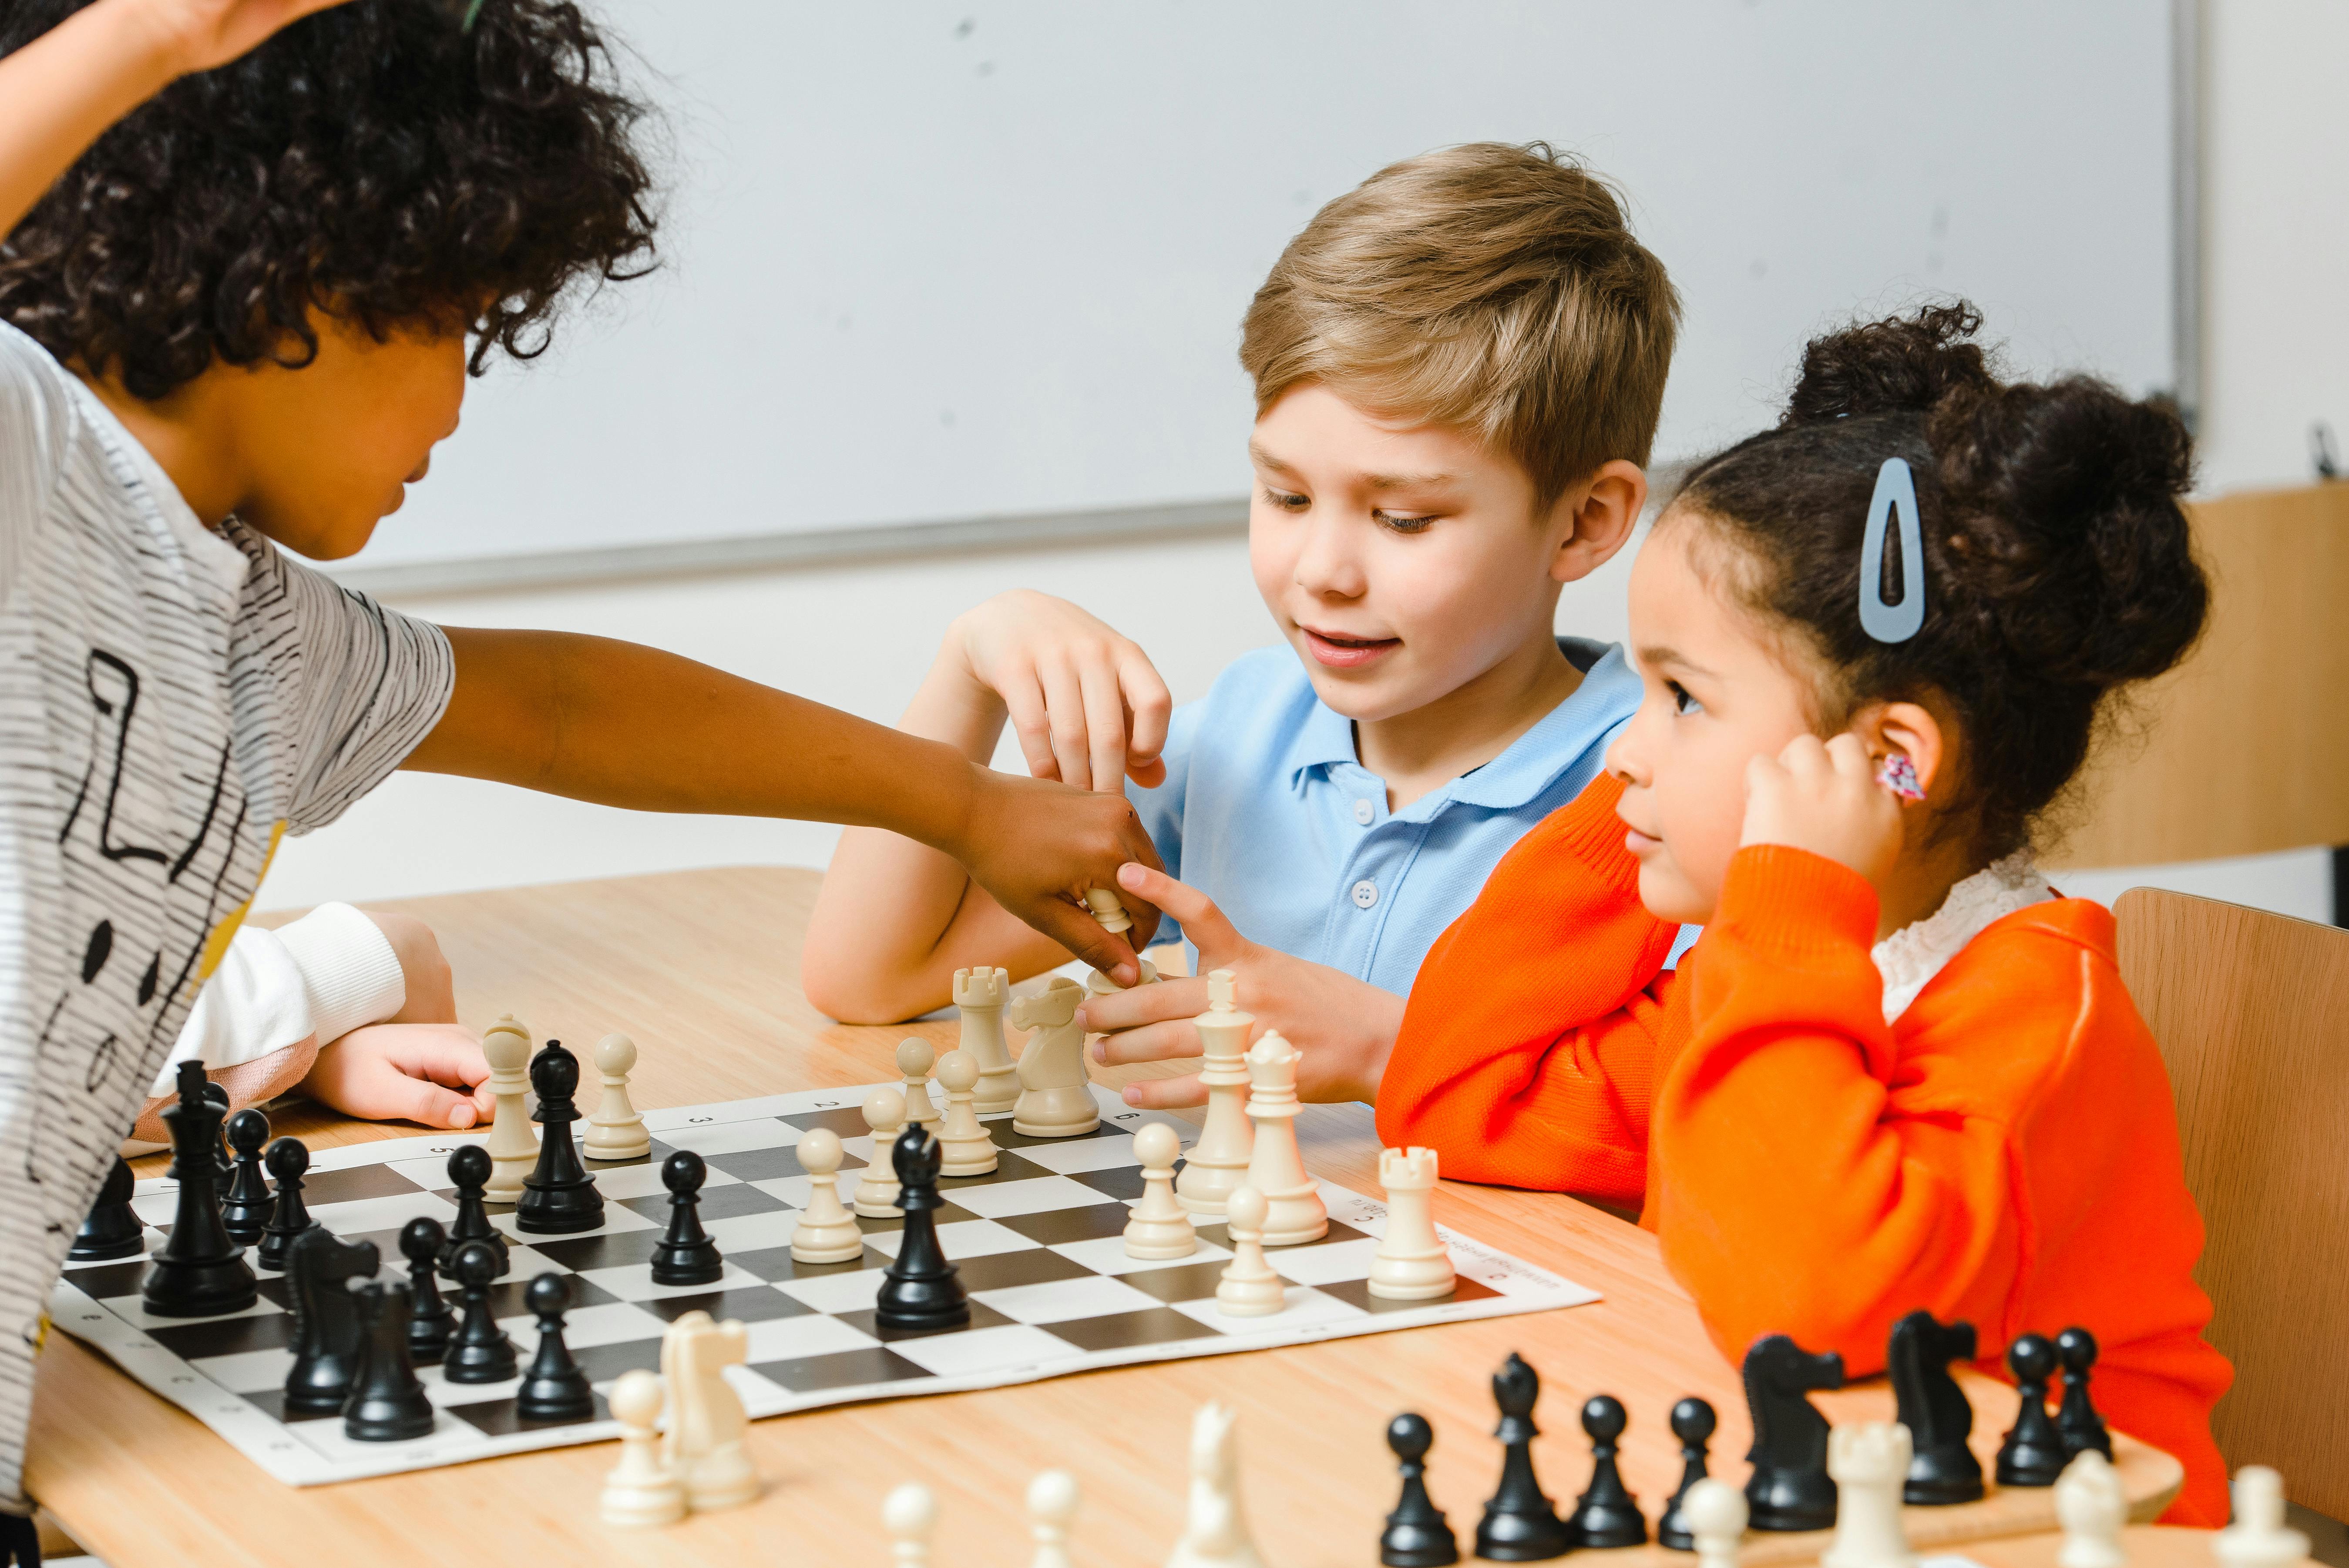 Children playing chess together | Source: Pexels